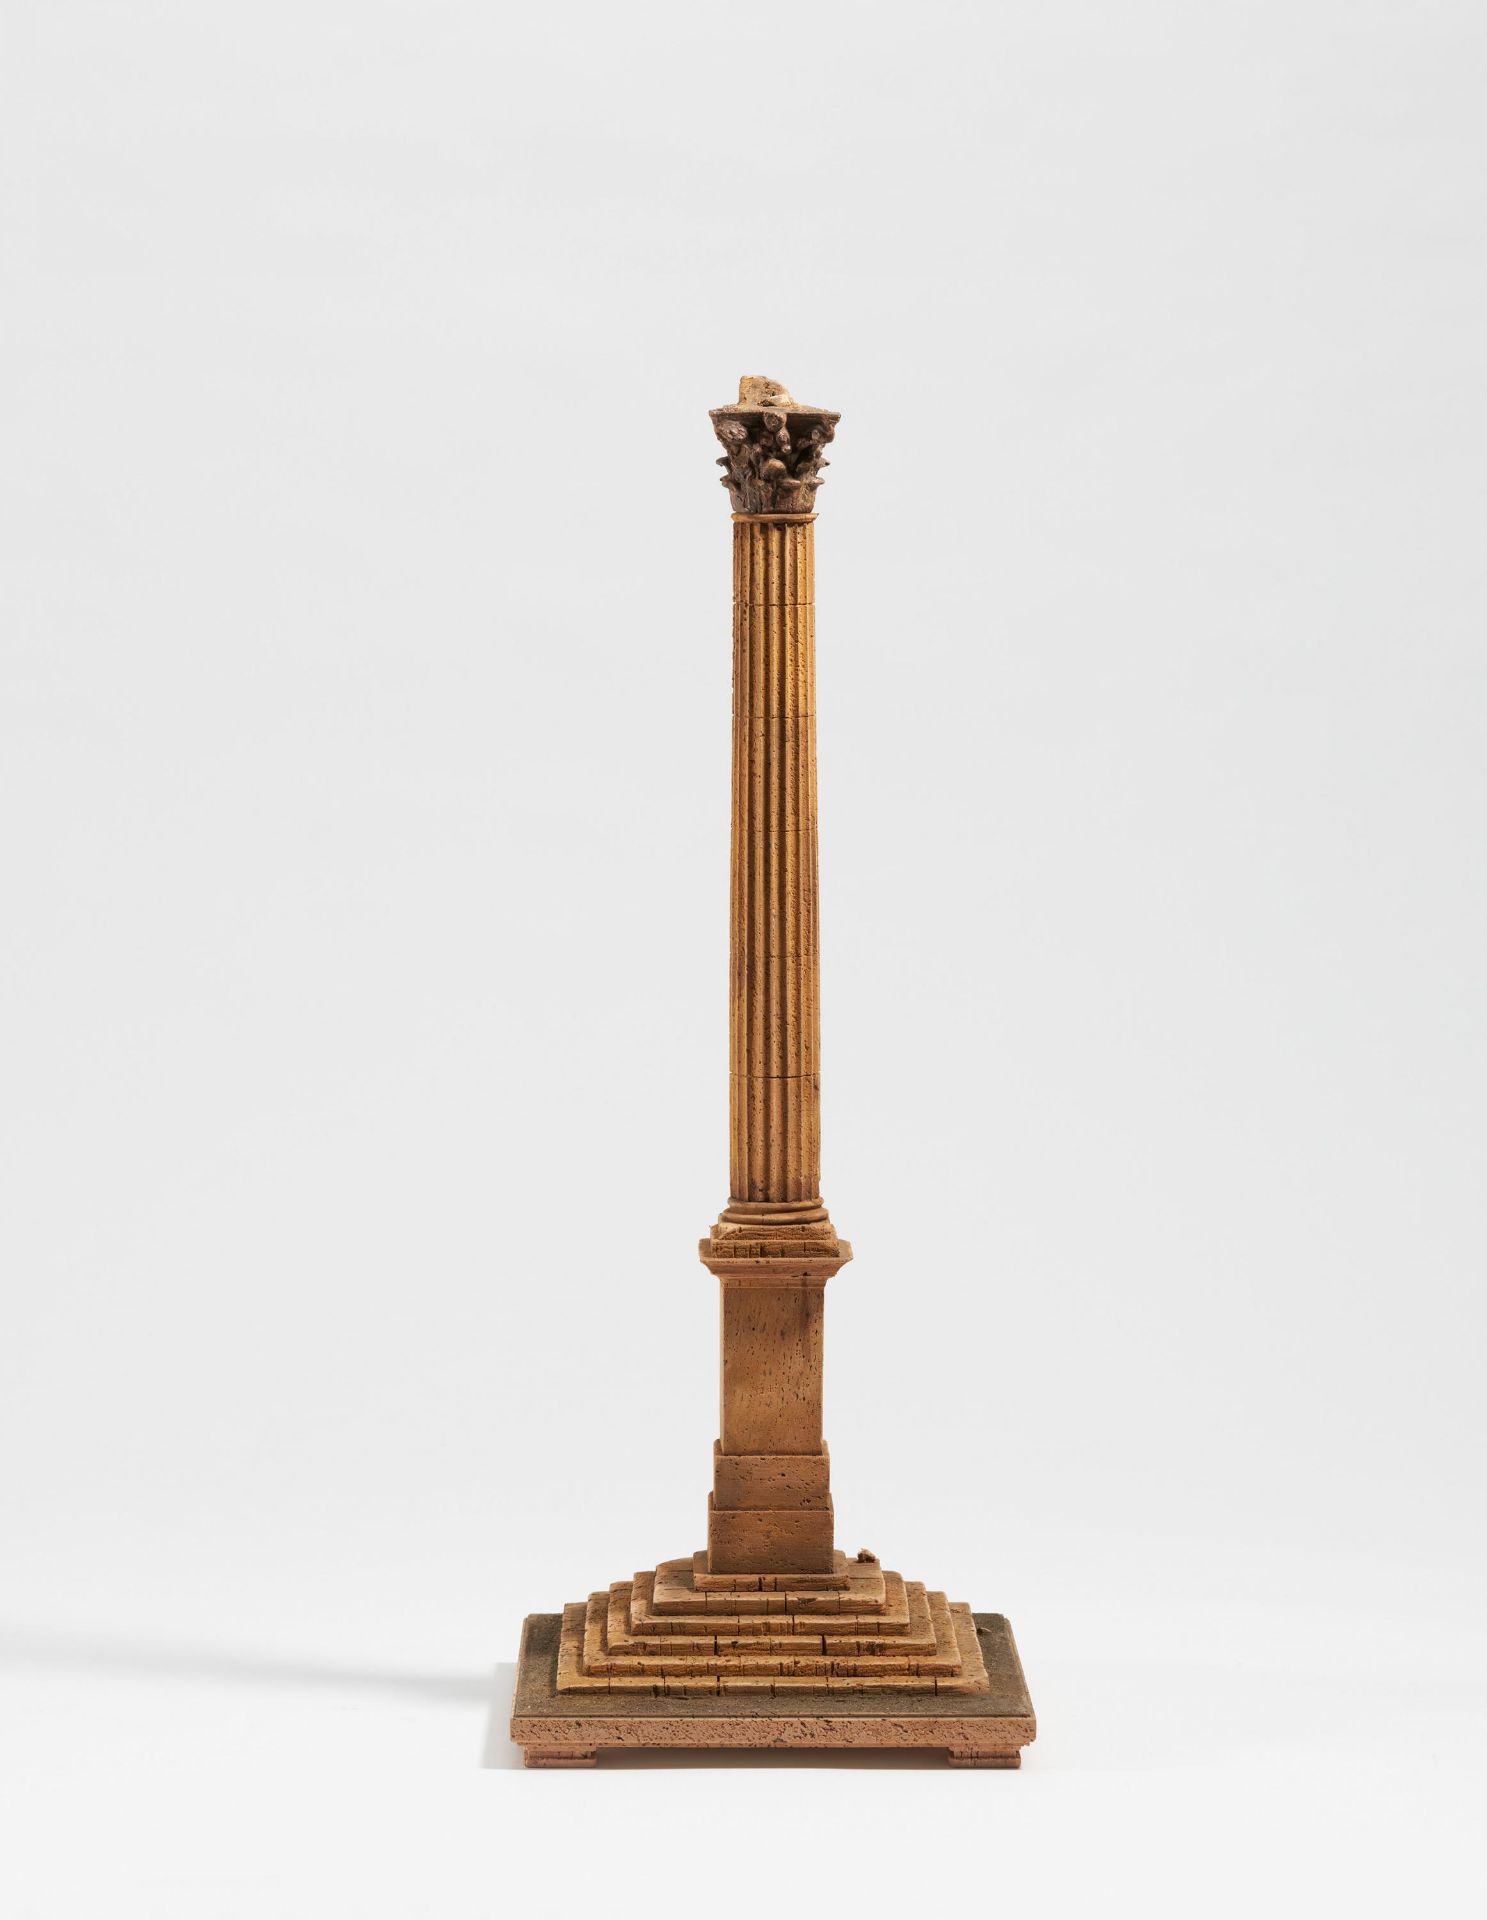 Cork model of the Phocas Column in Rome - Image 4 of 4